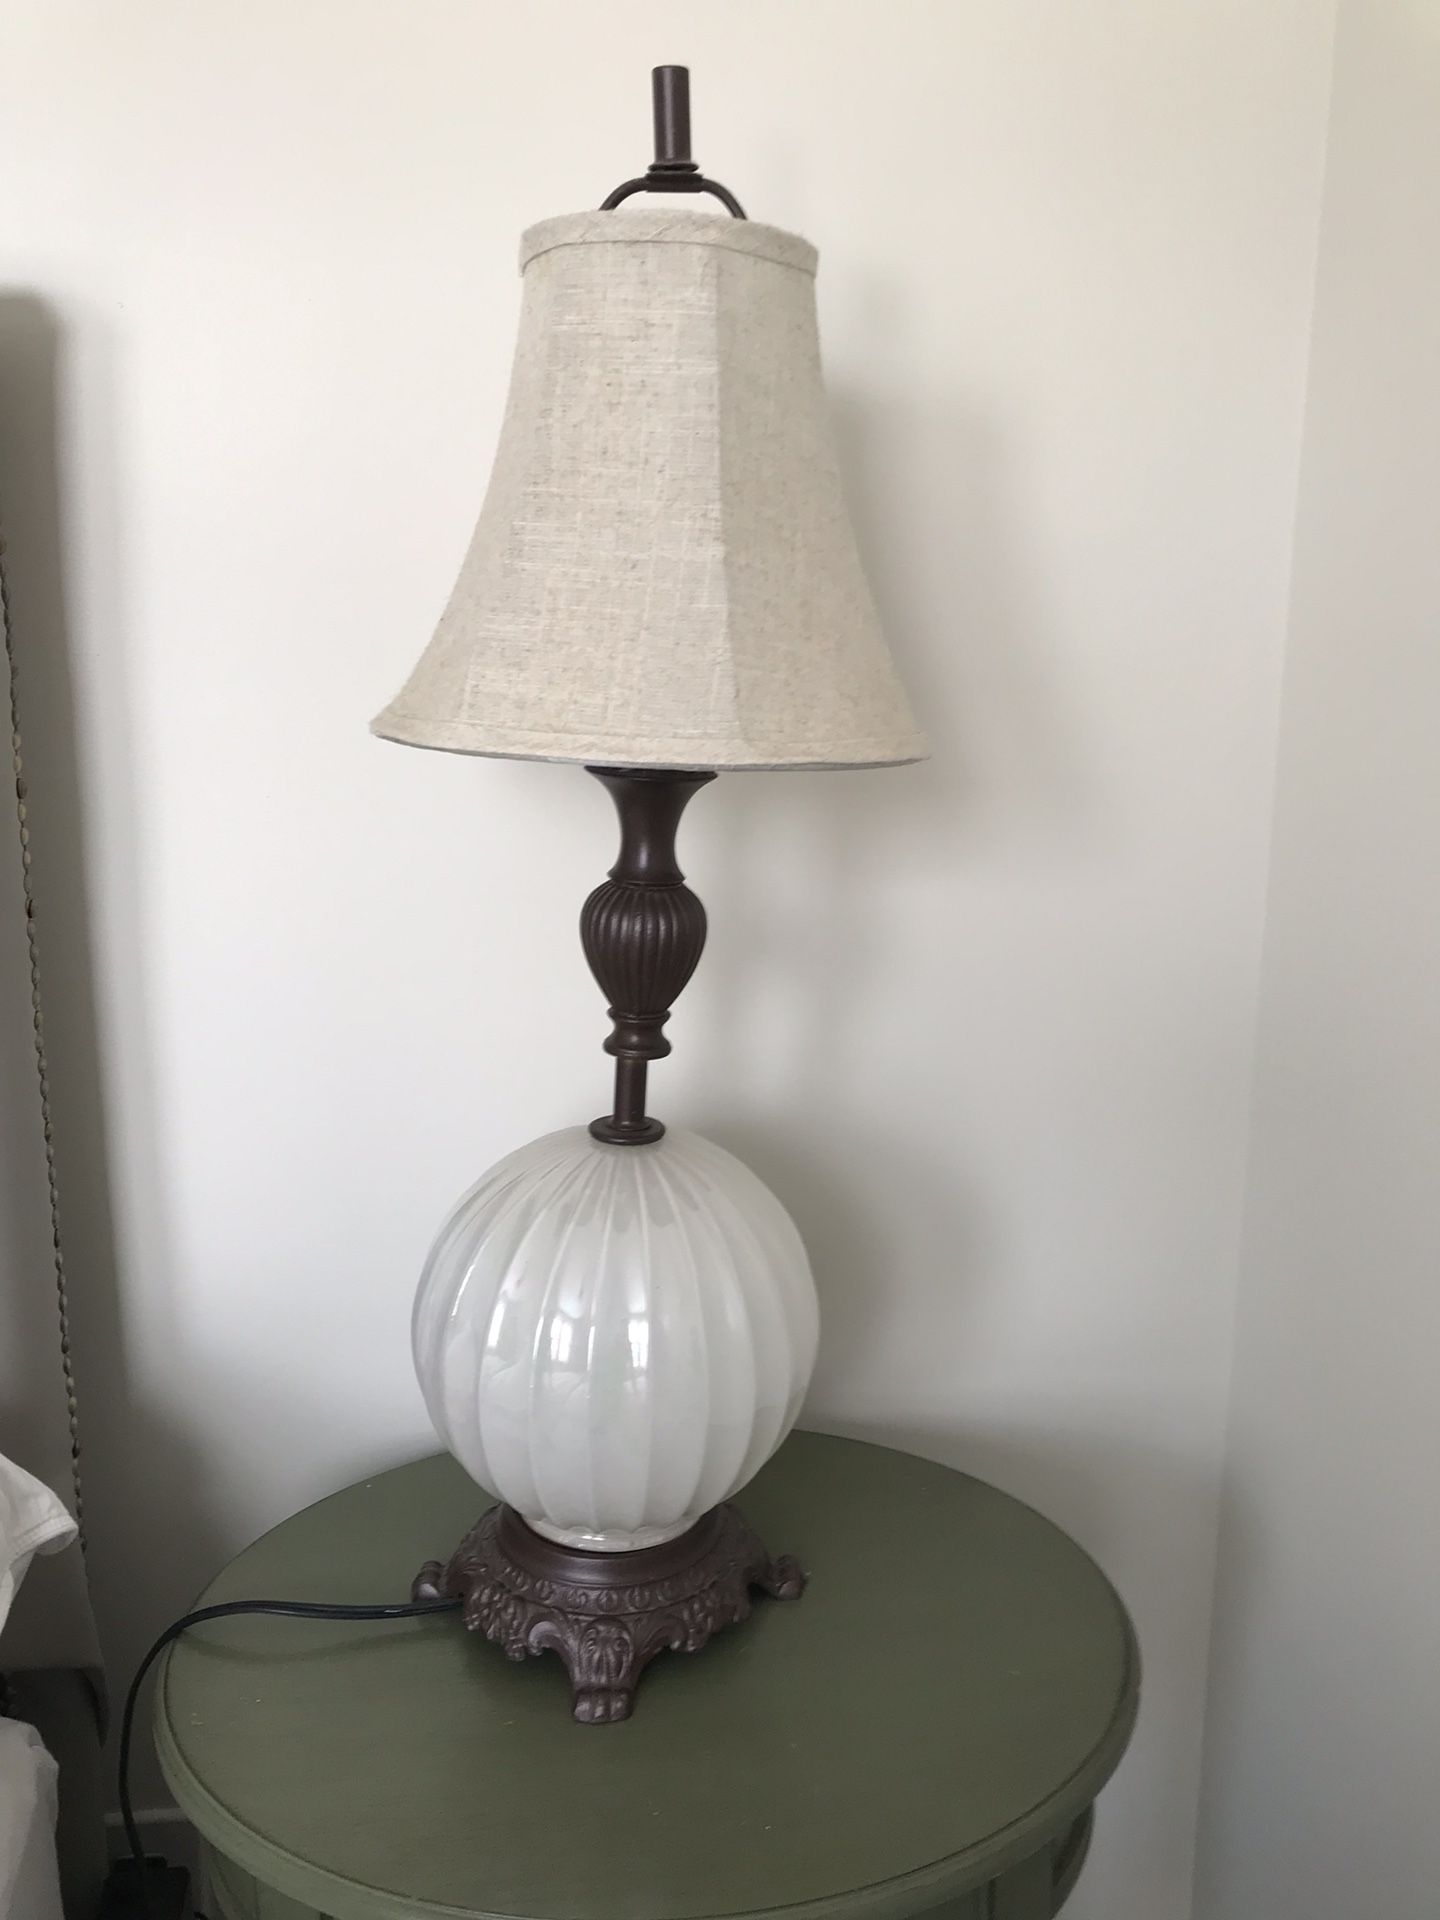 Free A pair of refurbished antique table lamps